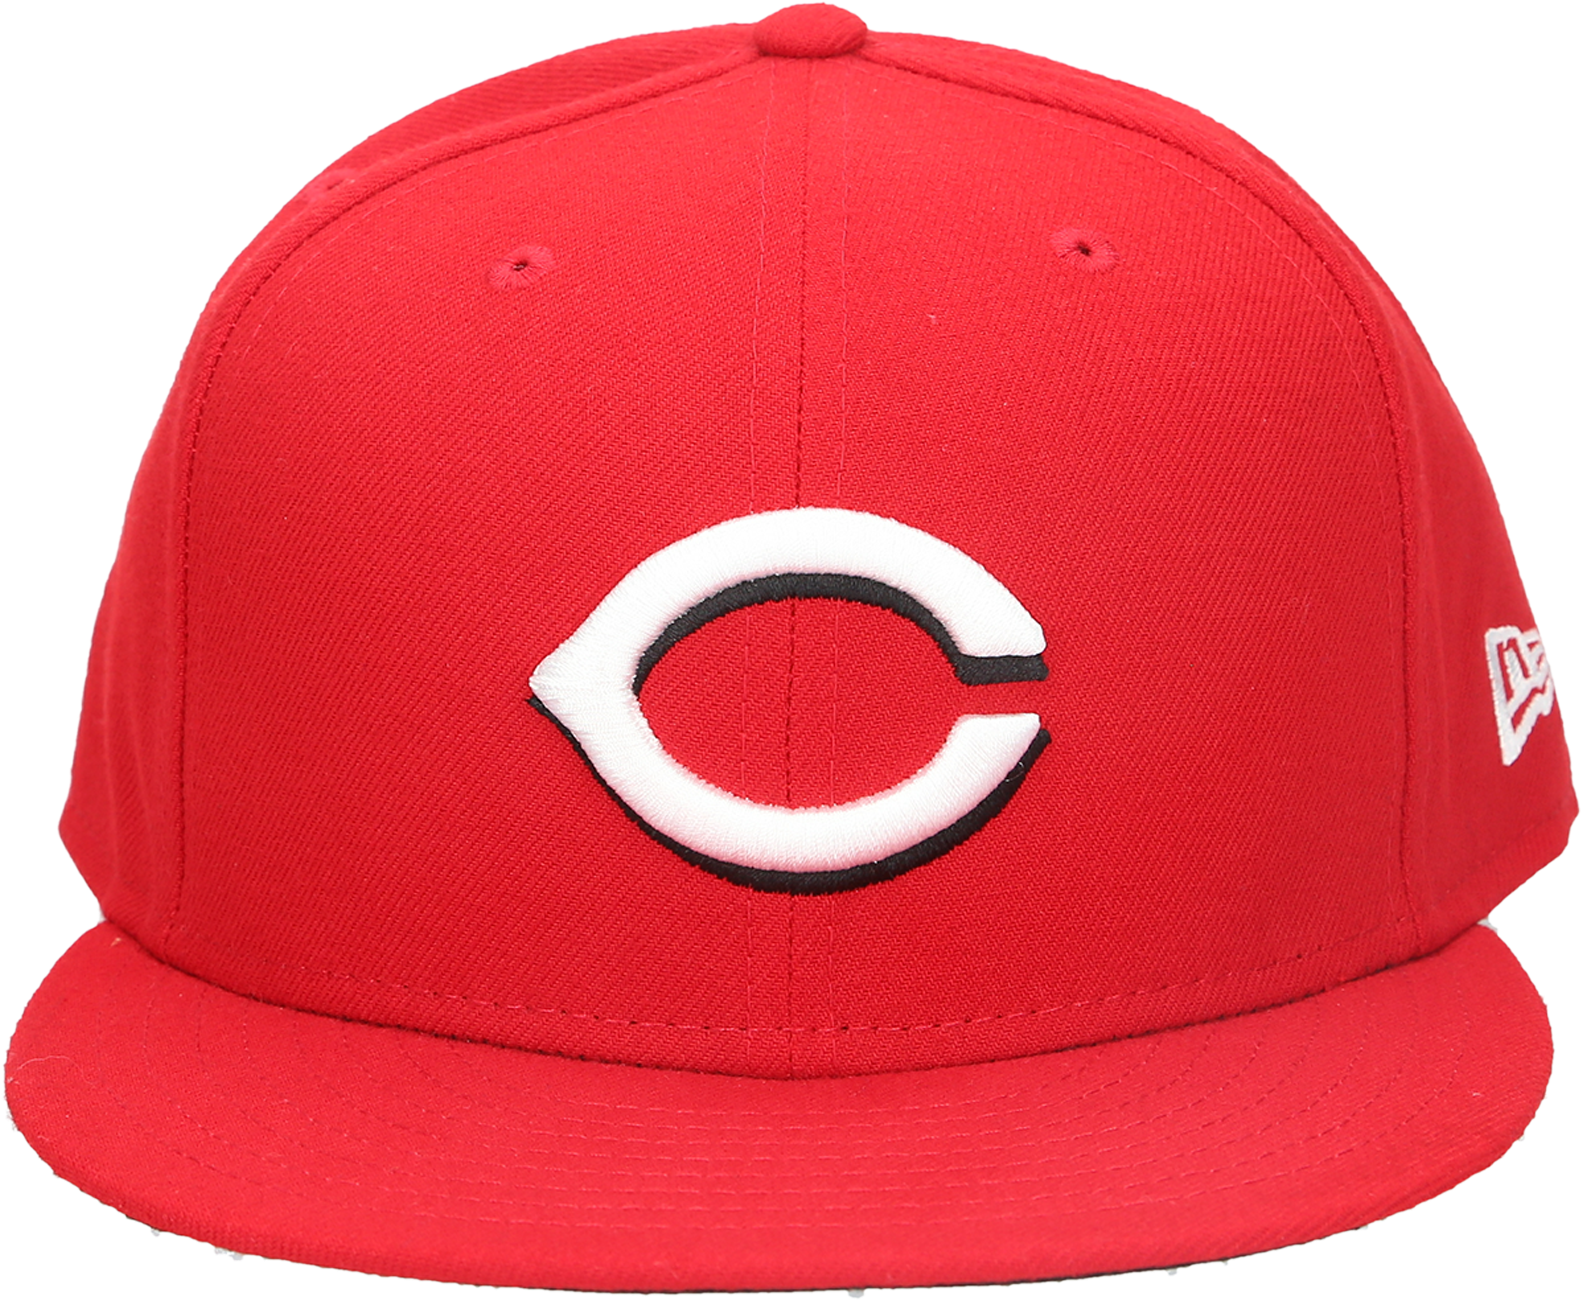 A Red Hat With A White C On It